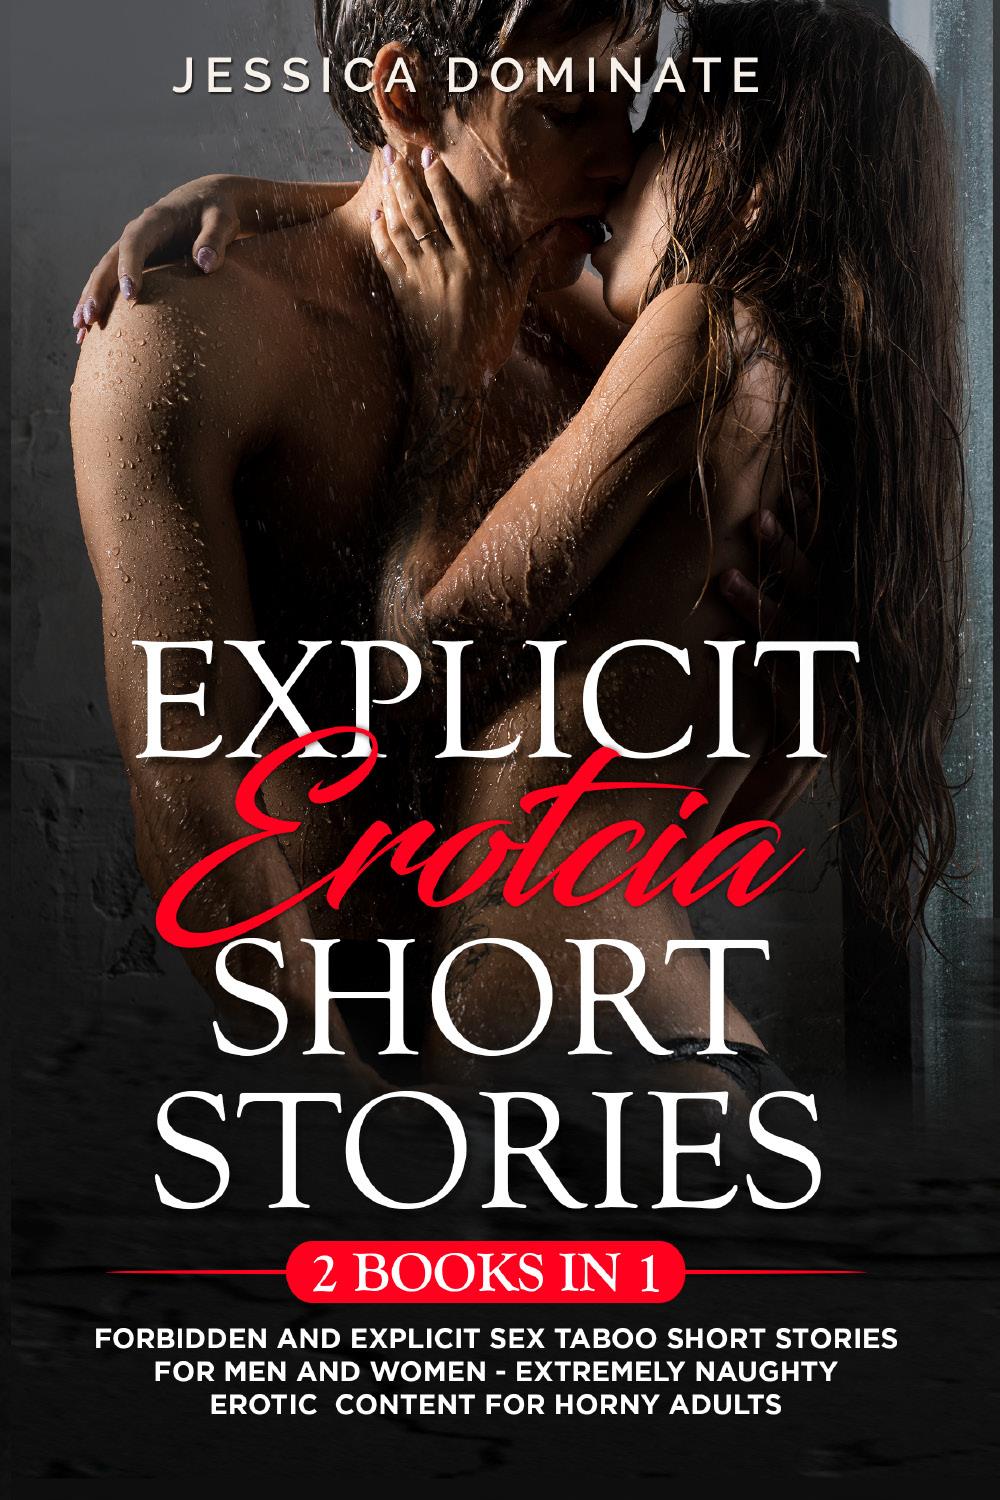 Explicit Erotcia Short Stories Books In Forbidden And Explicit